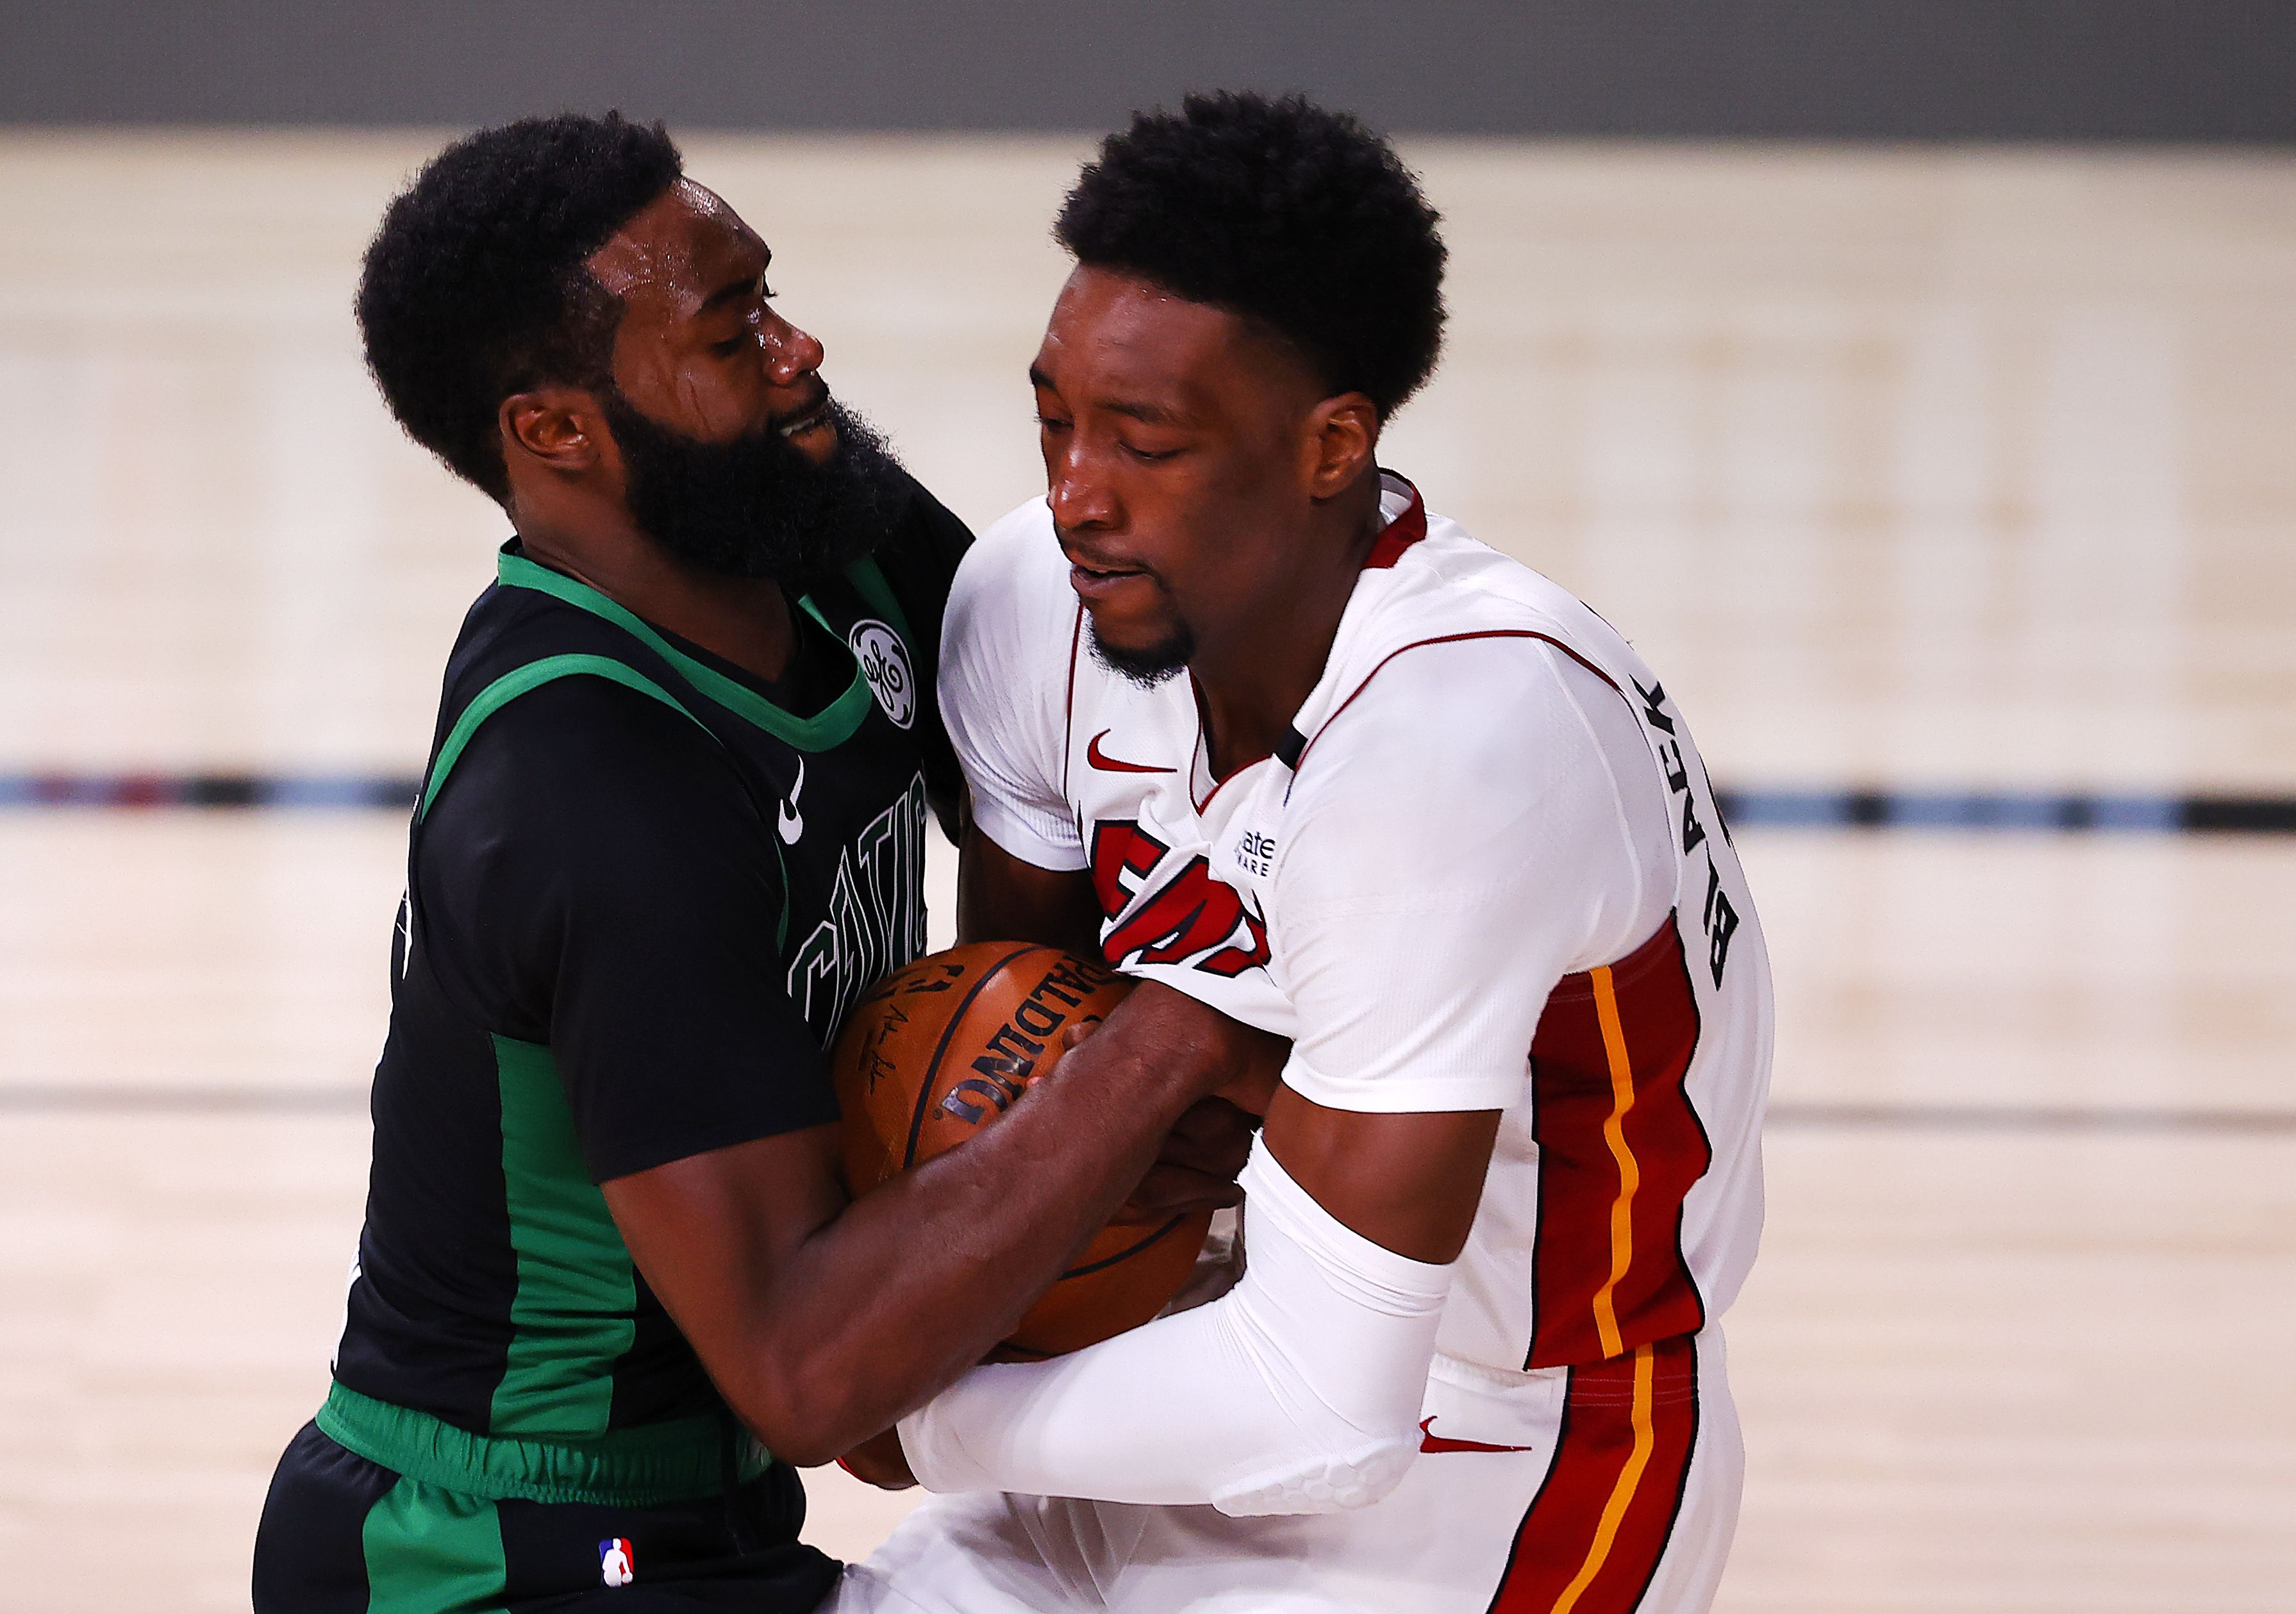 Celtics vs Heat game 6: times, how to watch on TV, stream online